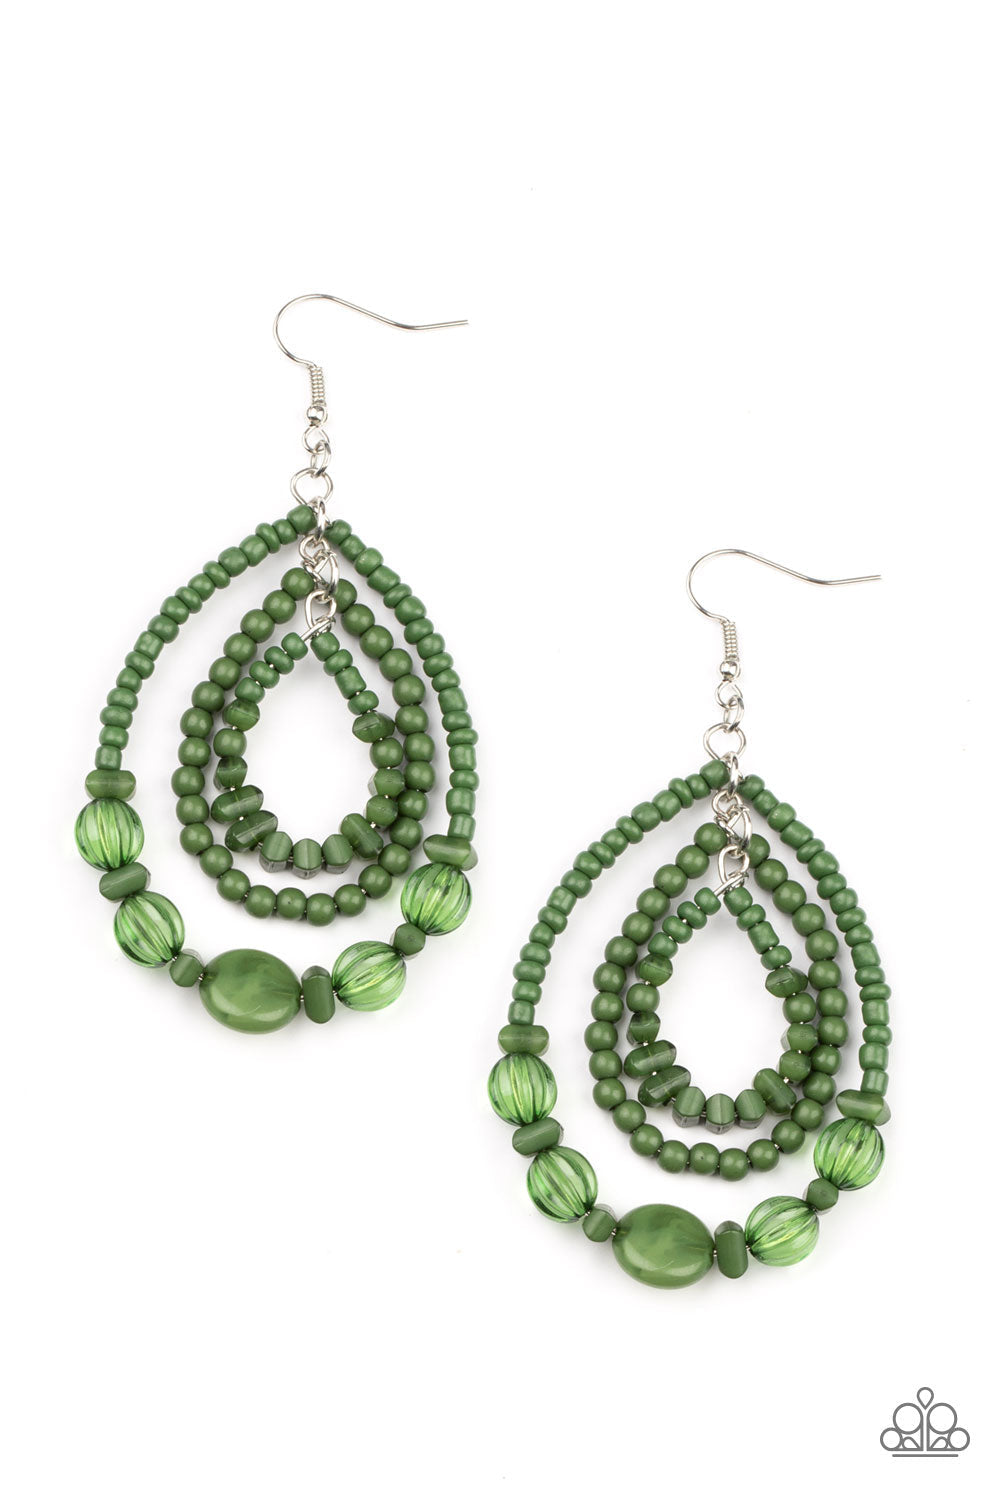 Prana Party - Green Seed Bead Earrings - Paparazzi Accessories - Mismatched green stone, seed bead, crystal-like, and faux stone beads are threaded along three dainty wires that connect into a colorful teardrop lure. Earring attaches to a standard fishhook fitting. Sold as one pair of earrings.